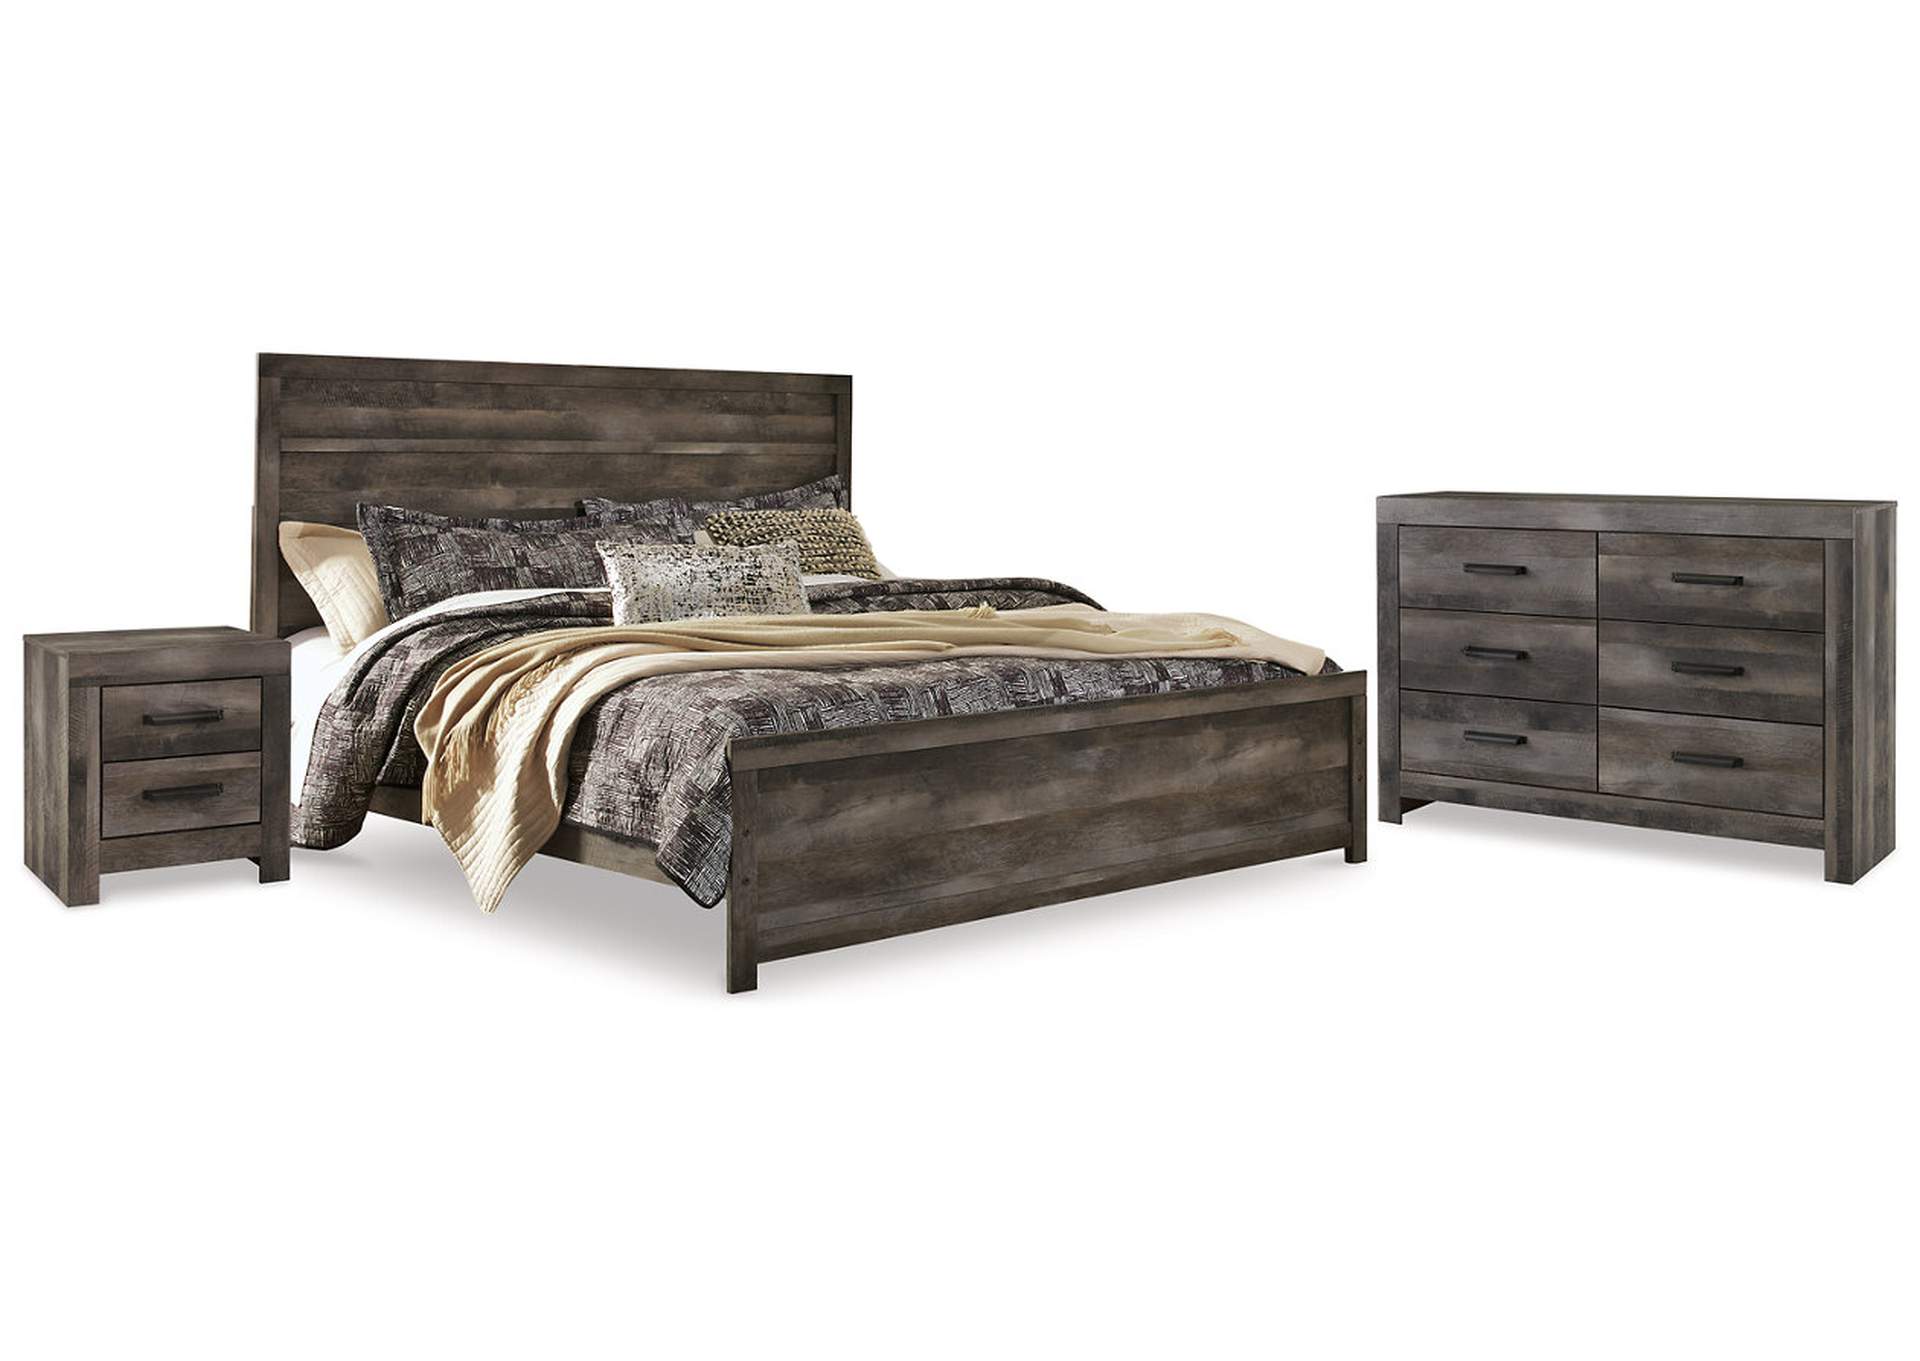 Wynnlow King Panel Bed, Dresser and Nightstand,Signature Design By Ashley